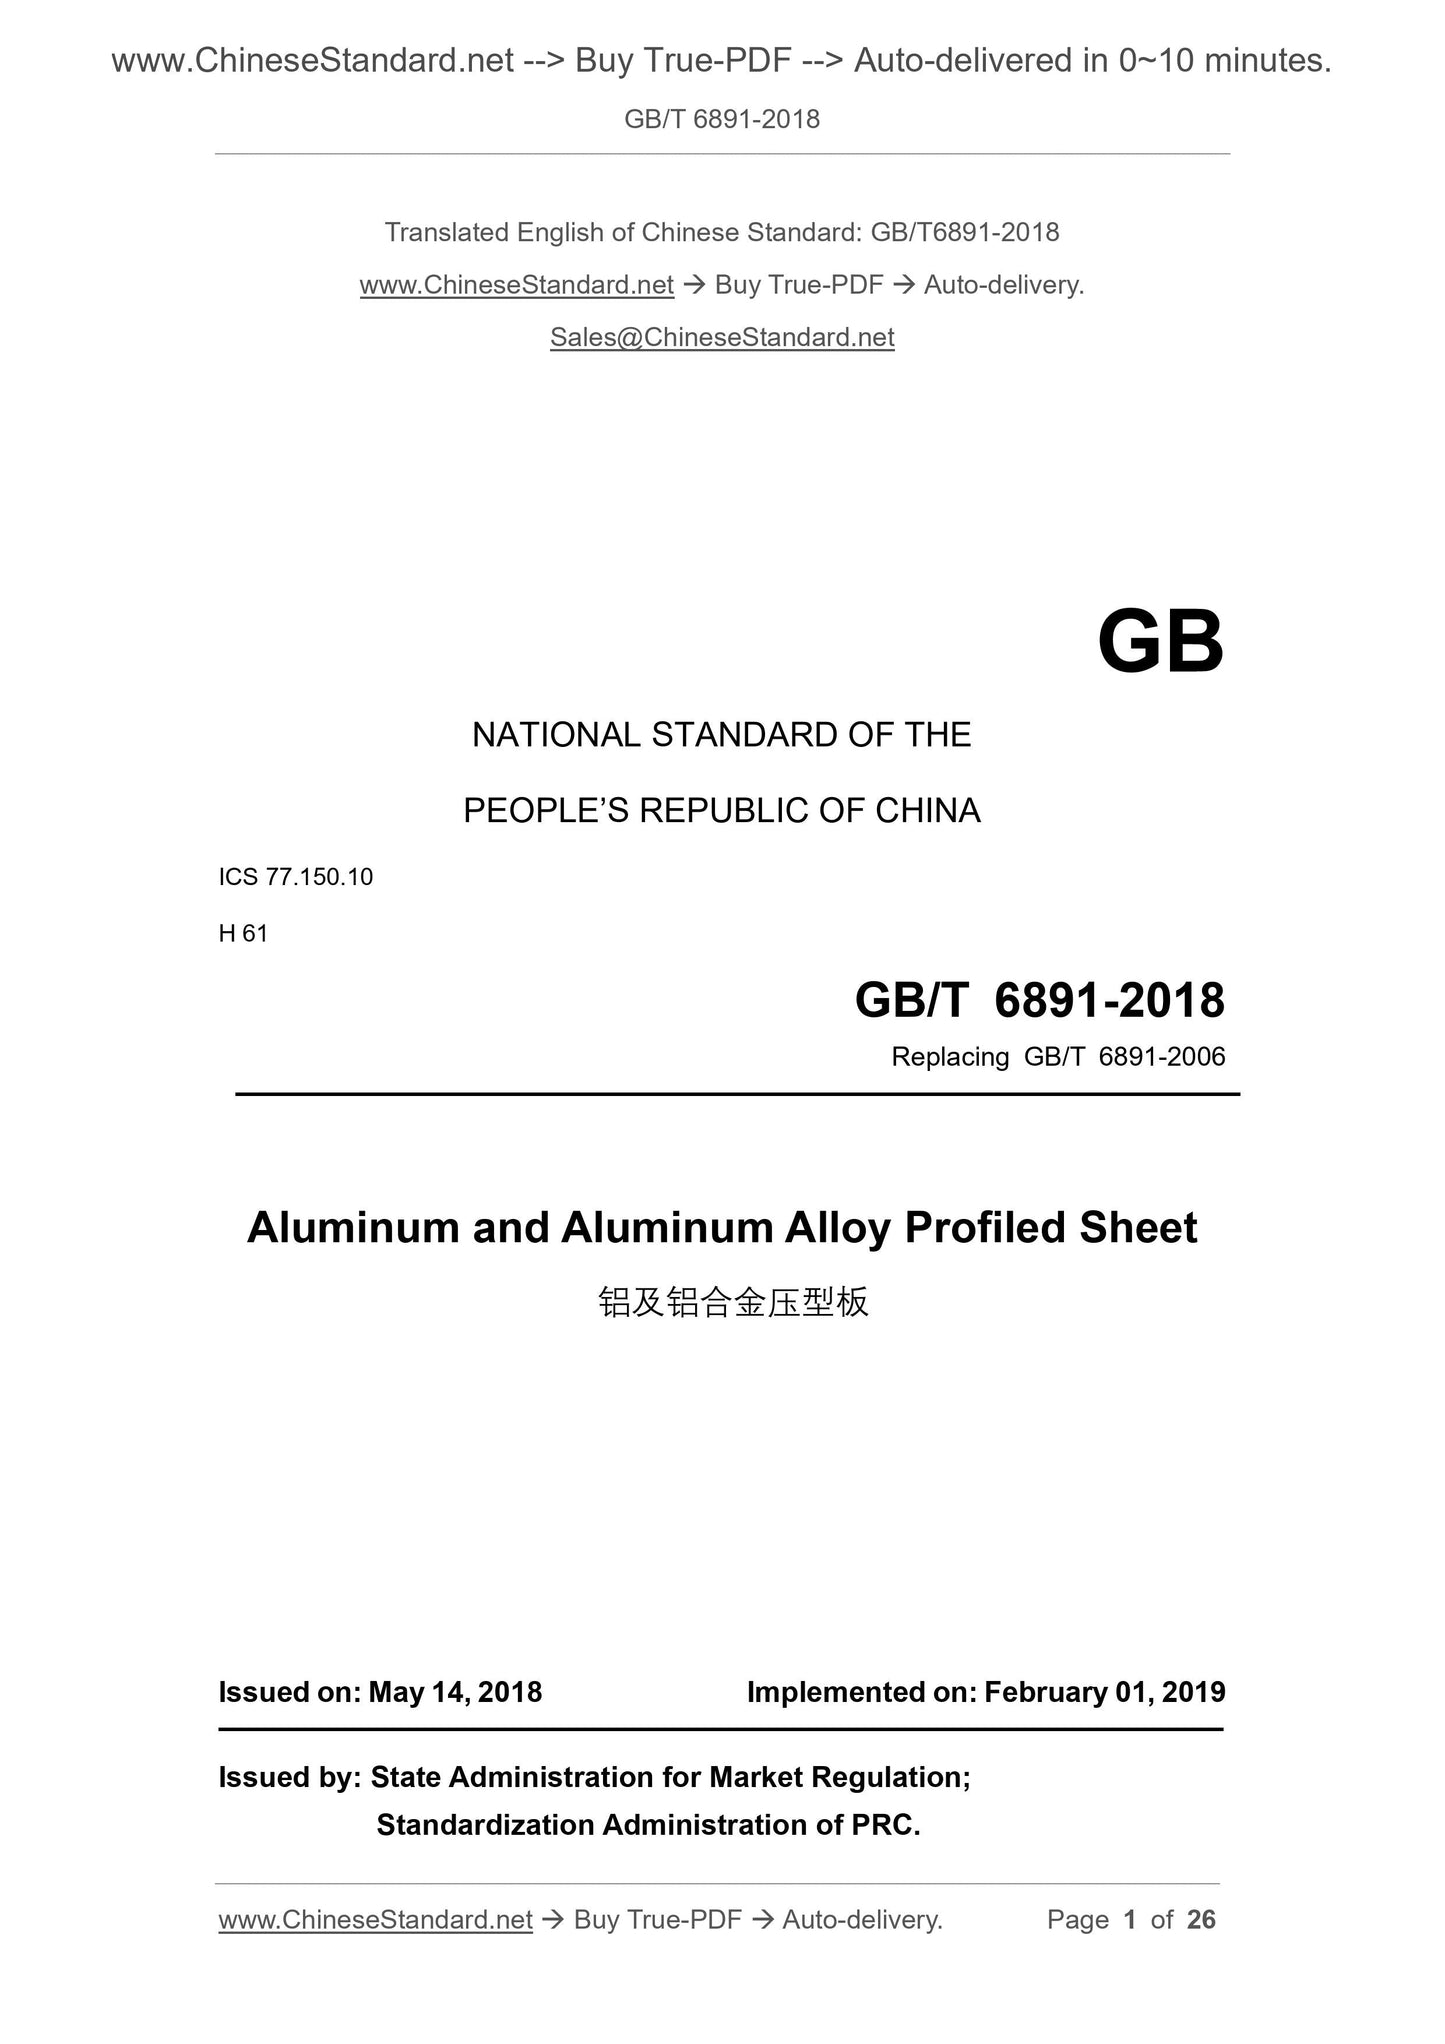 GB/T 6891-2018 Page 1